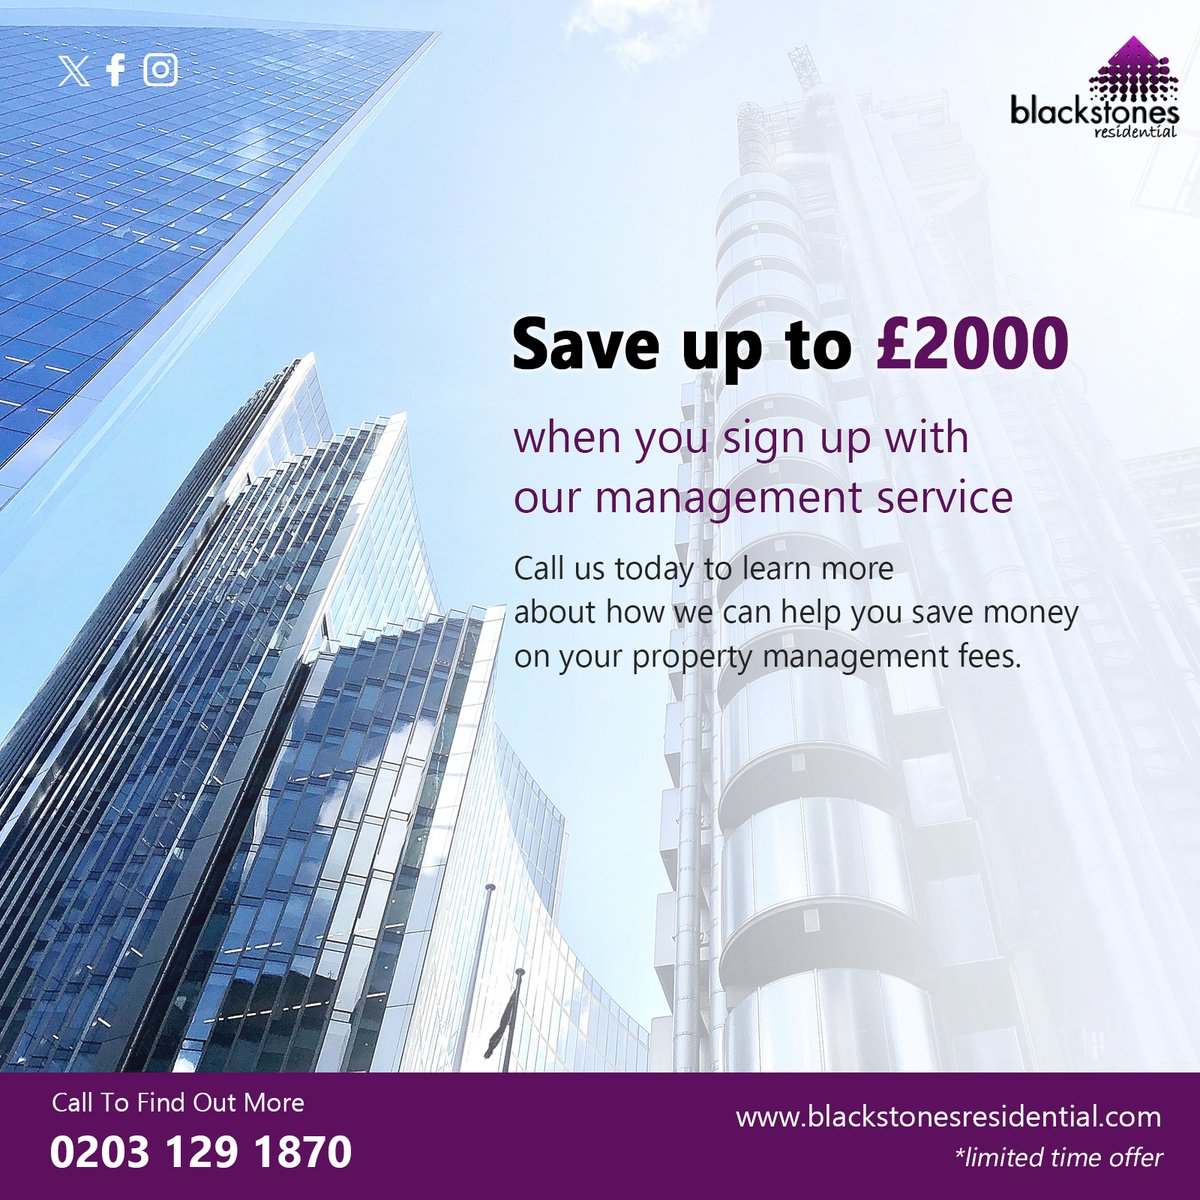 Save £2,000! Our comprehensive property management services are designed to alleviate the burden of managing your rental property, allowing you to focus on what matters most.

Call us on 0203 129 1870
blackstonesresidential.com

#PropertyManagement #propertyexpert #londonhome